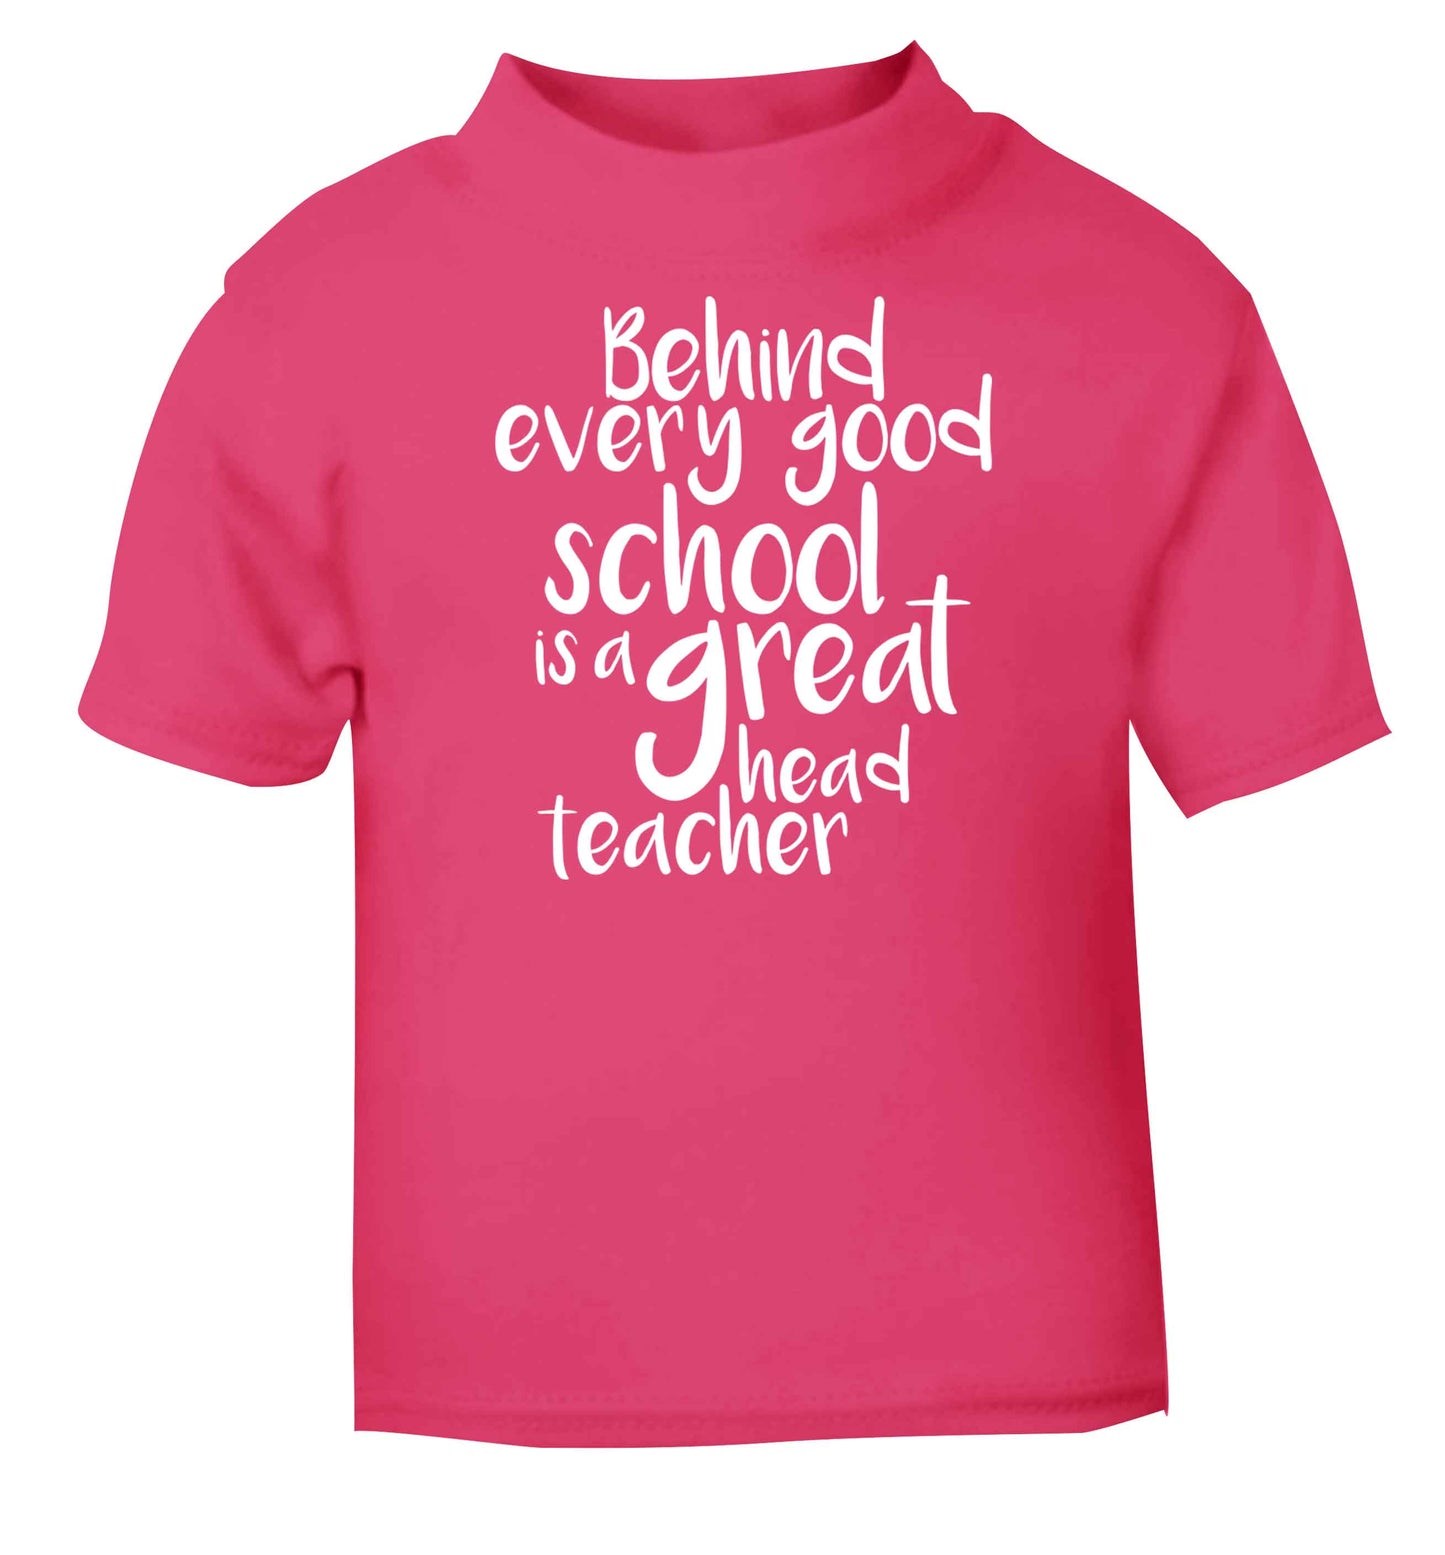 Behind every good school is a great head teacher pink baby toddler Tshirt 2 Years